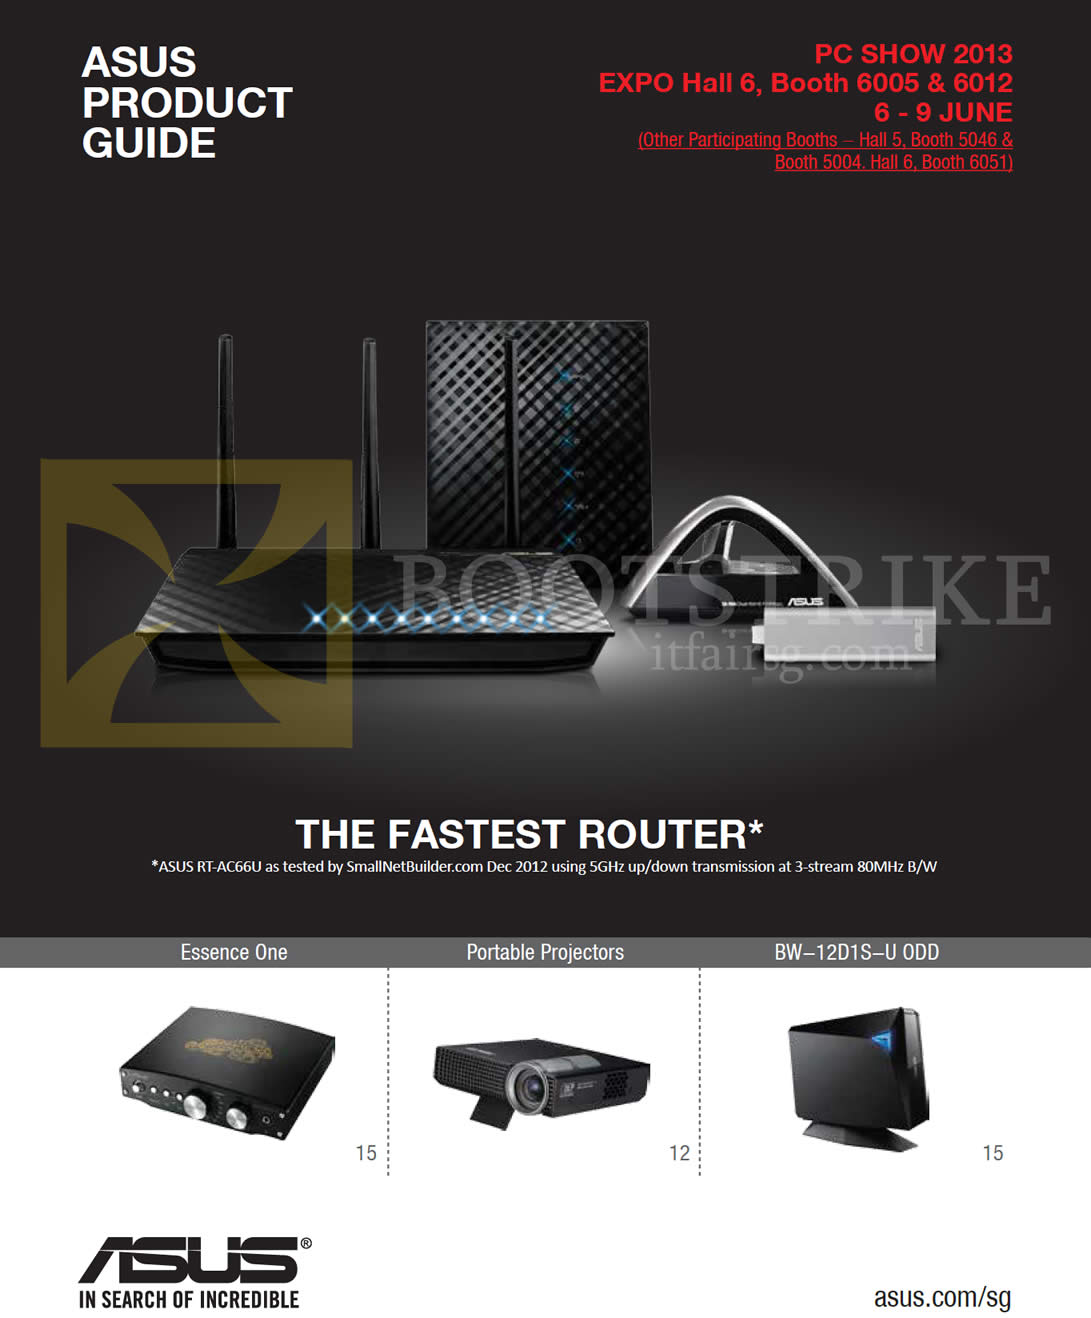 PC SHOW 2013 price list image brochure of ASUS Networking Routers Wireless Essence One, Portable Projectors, BW-12D1S-U ODD